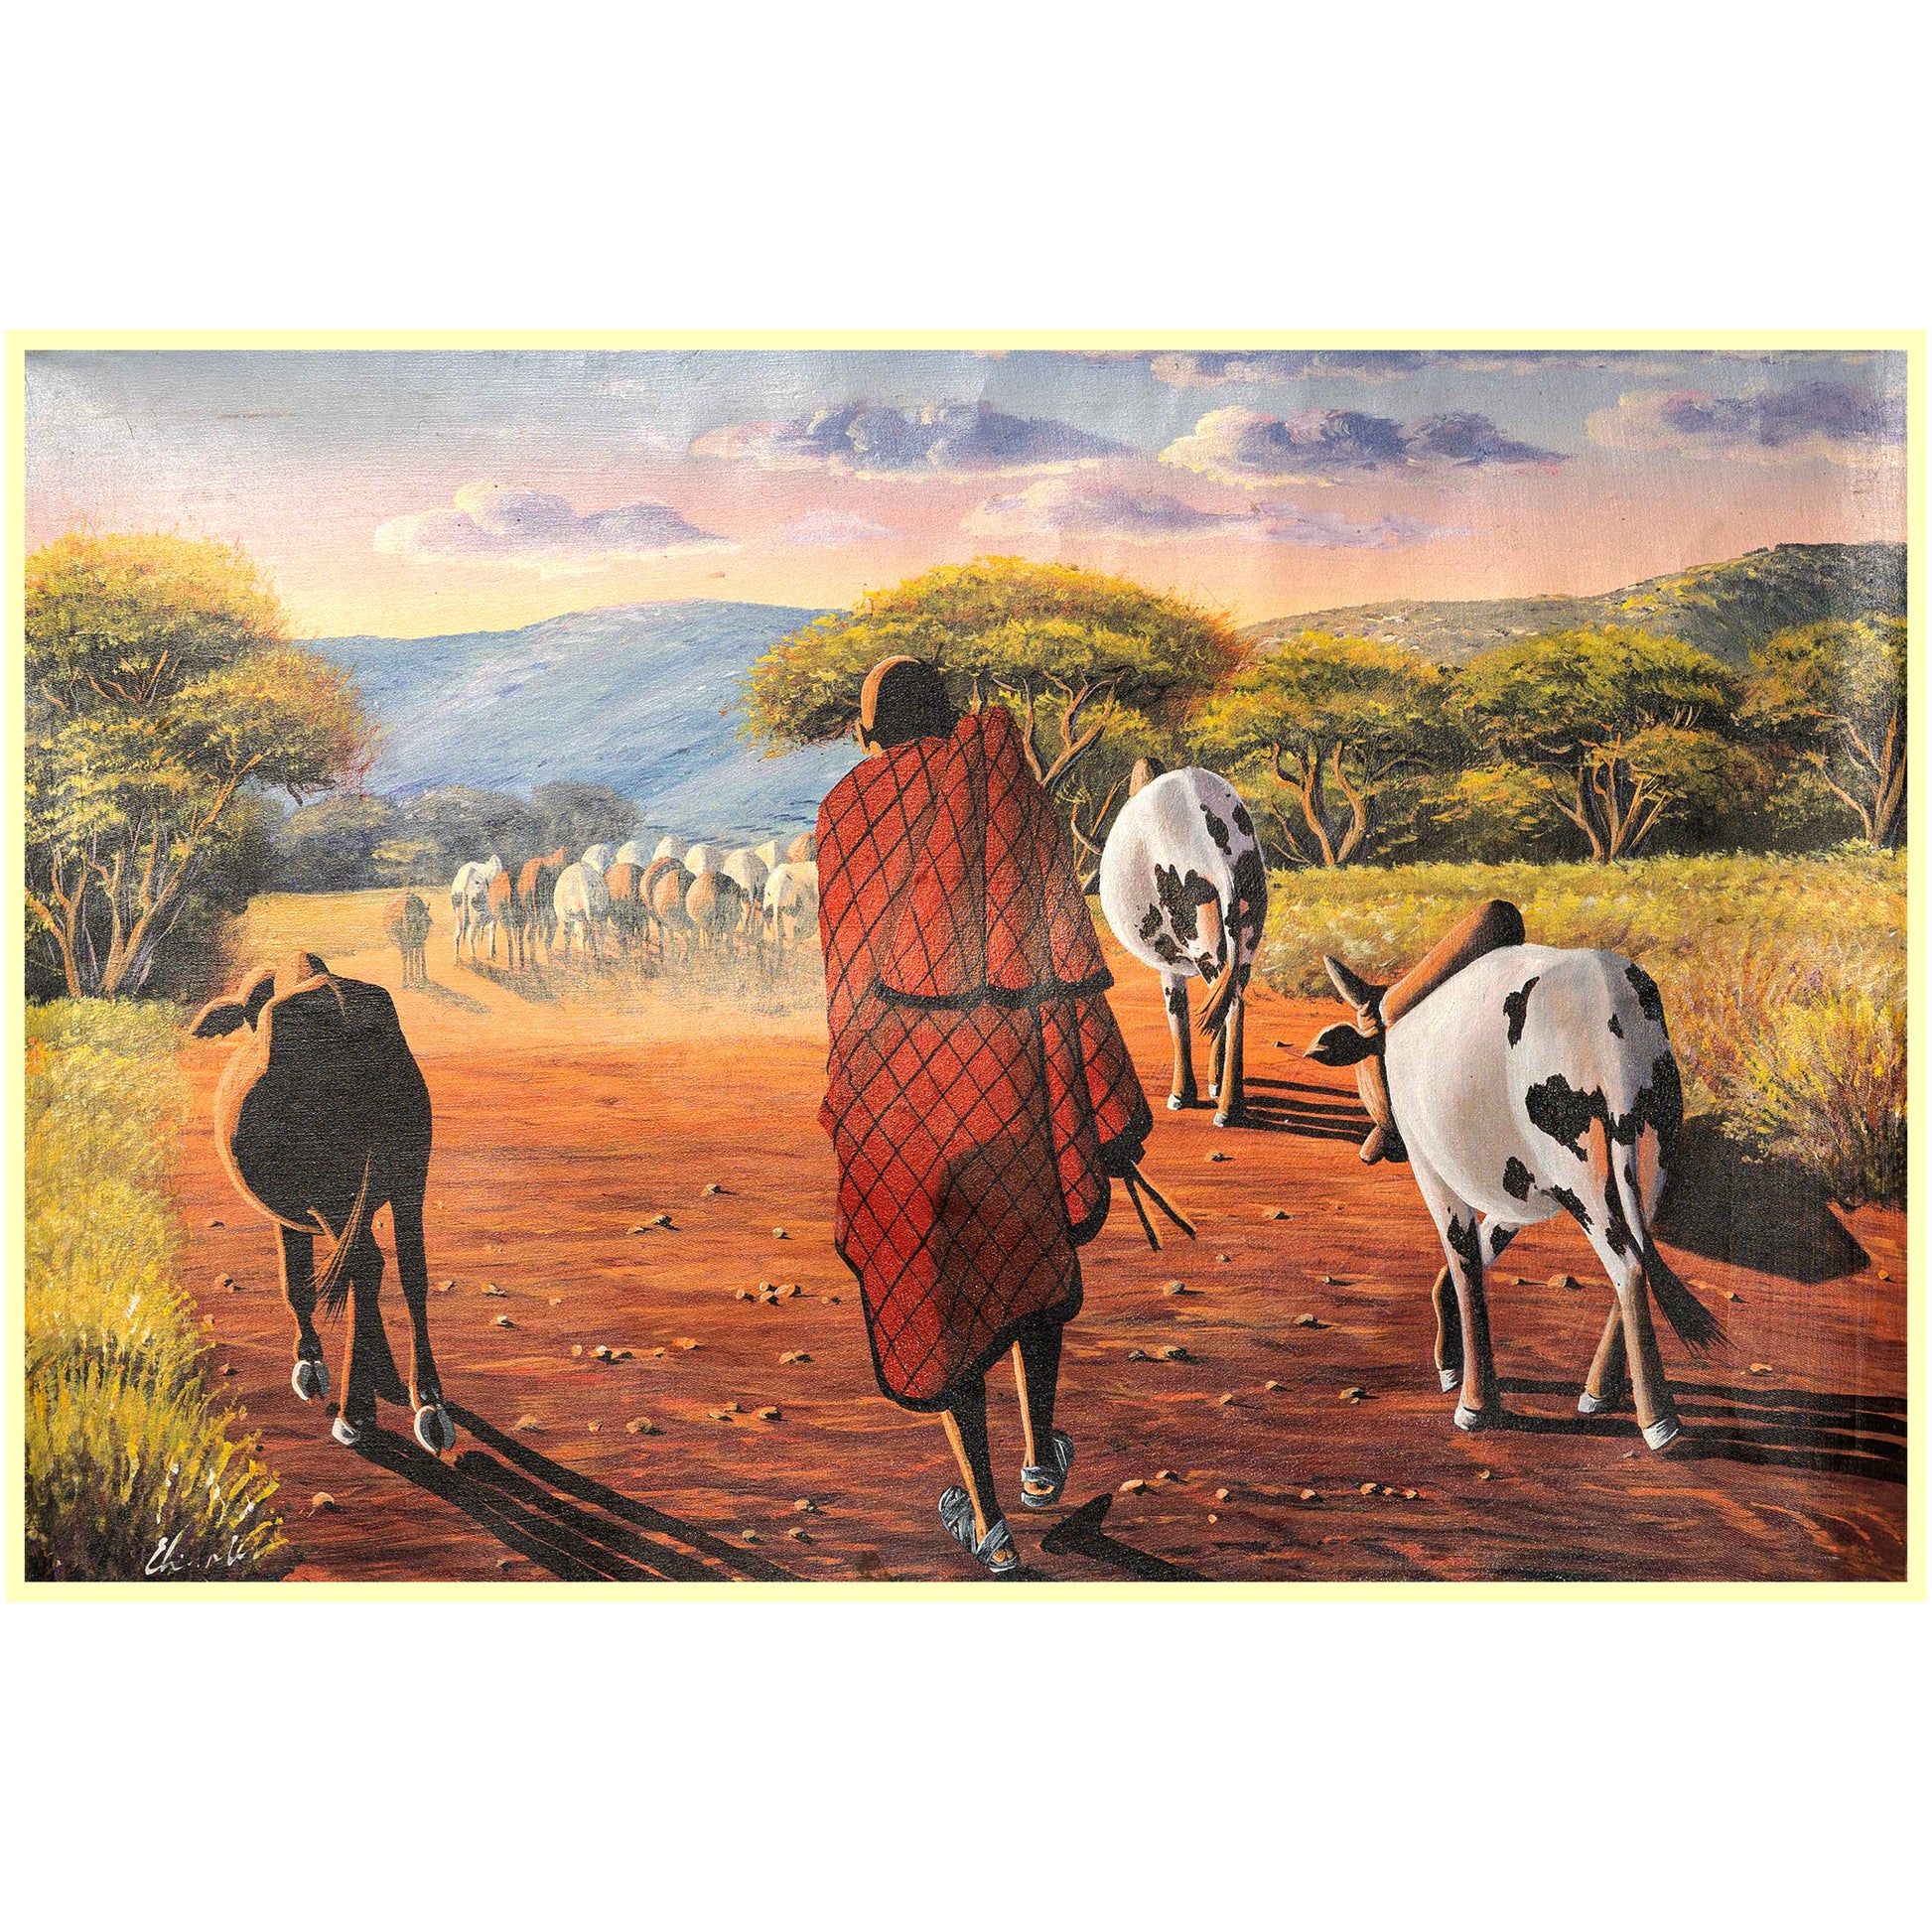 Maasai grazer headed home - Authentic African handicrafts | Clothing, bags, painting, toys & more - CULTURE HUB by Muthoni Unchained